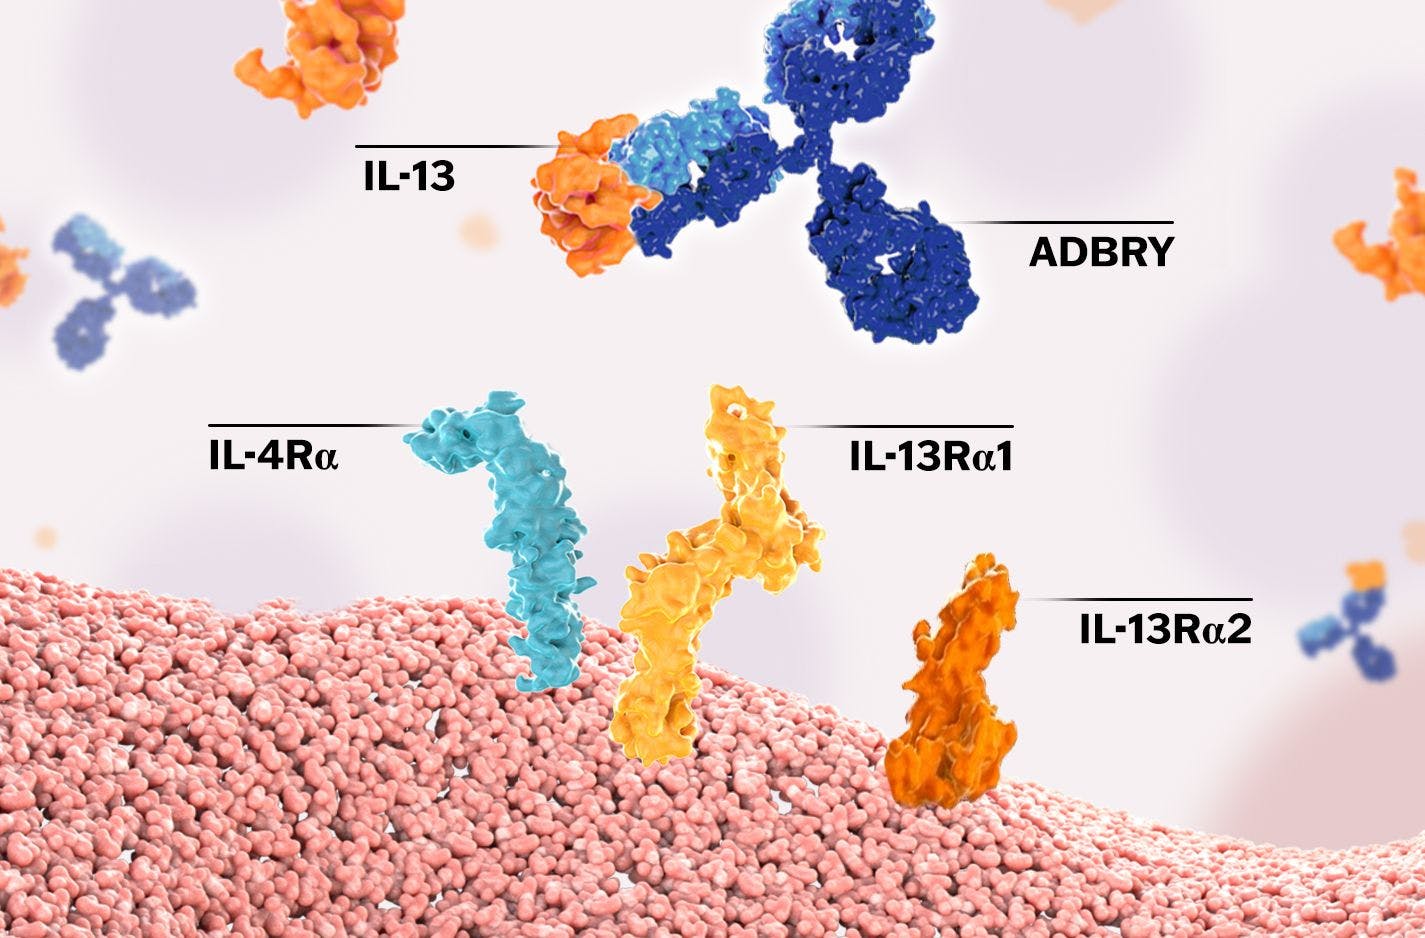 Adbry selectively inhibits IL-13 interaction with the type II receptor complex (IL-13Rα1/IL-4Rα), preventing IL-13–induced inflammatory responses in the skin.